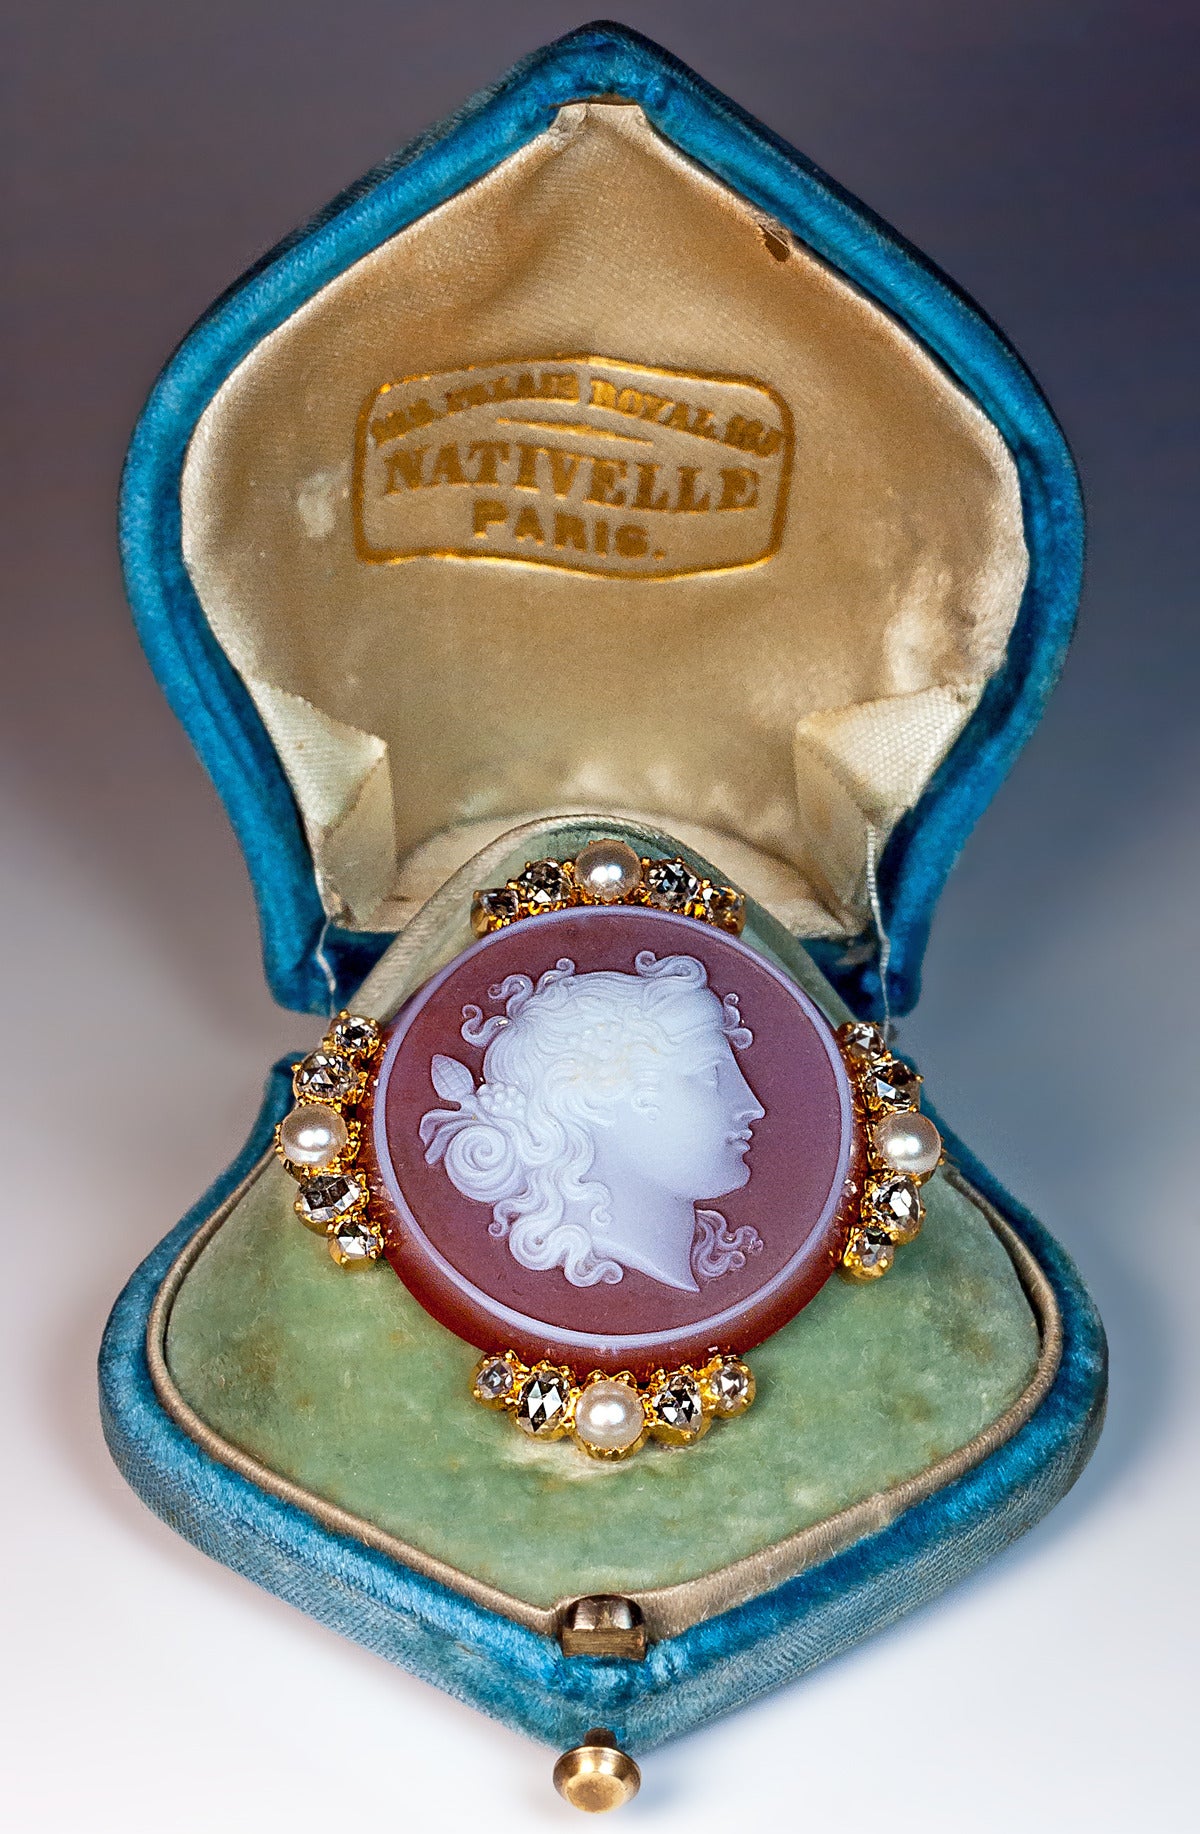 A finely carved carnelian cameo of Dionysus, the Greco-Roman god of wine making and fertility set in 18K gold bezel embellished with half pearls and rose cut diamonds

Width 37 mm (almost 1 1/2 in.)

Marked with French eagle-shaped assay